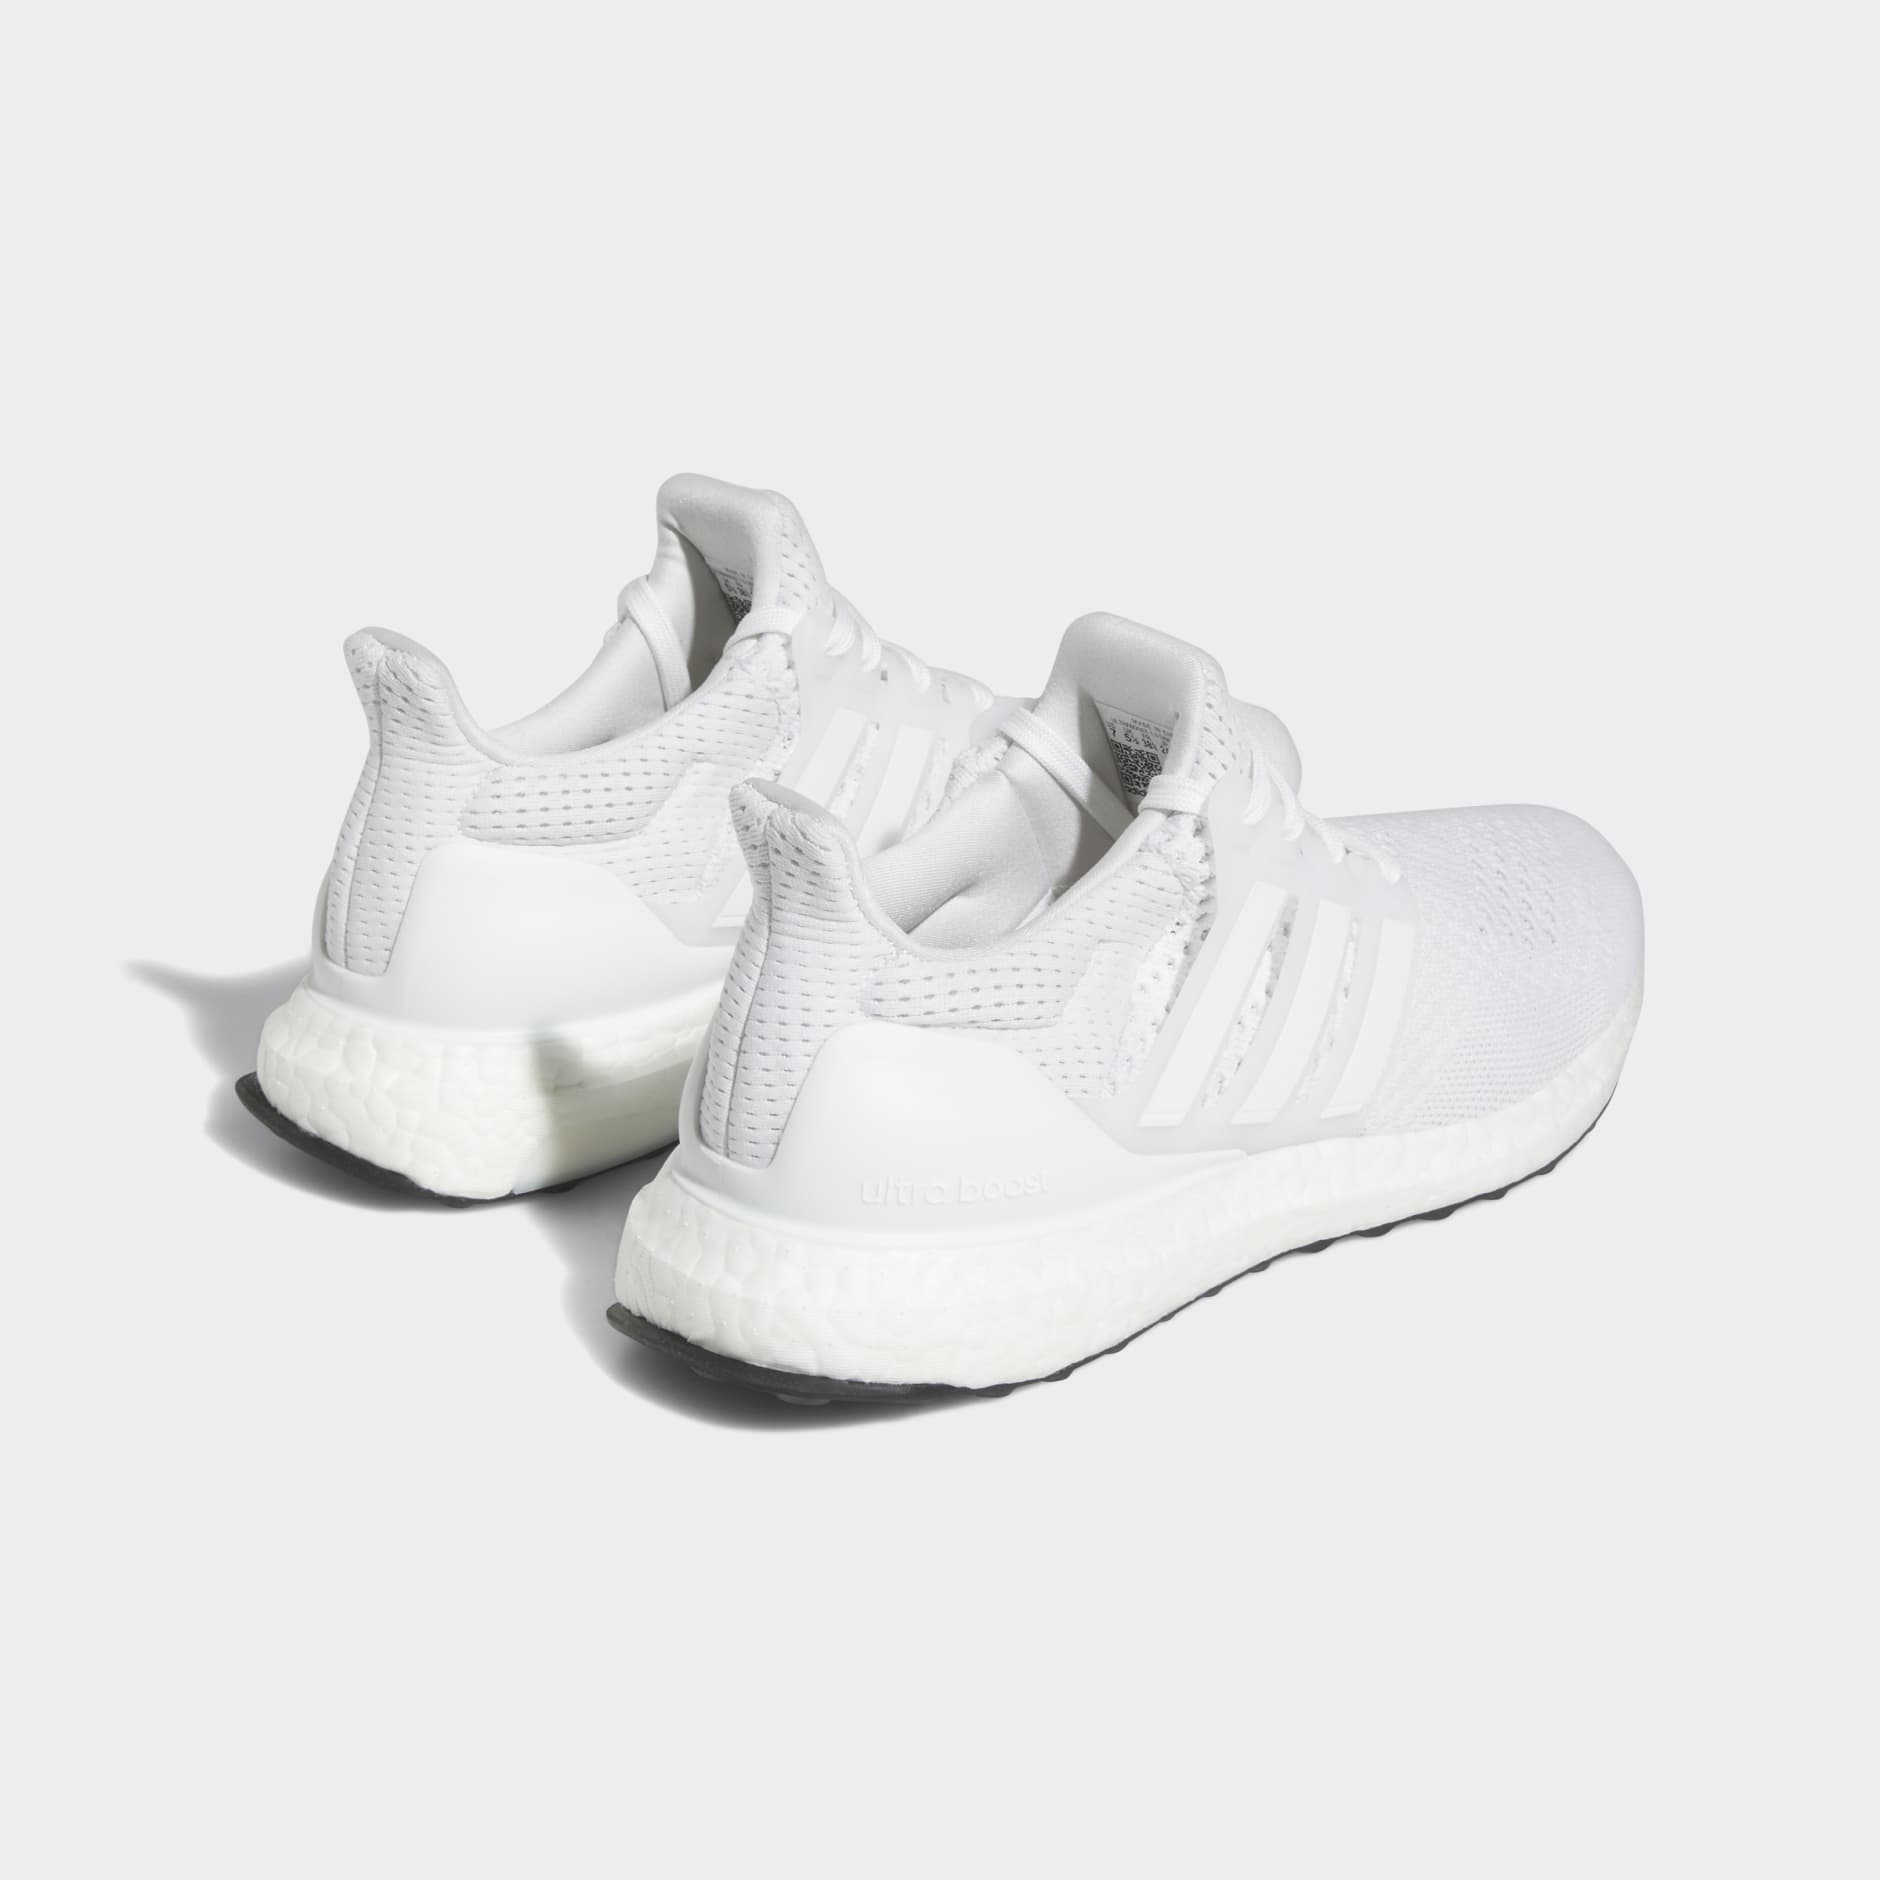 Shoes - Ultraboost 1.0 Shoes - White | adidas South Africa